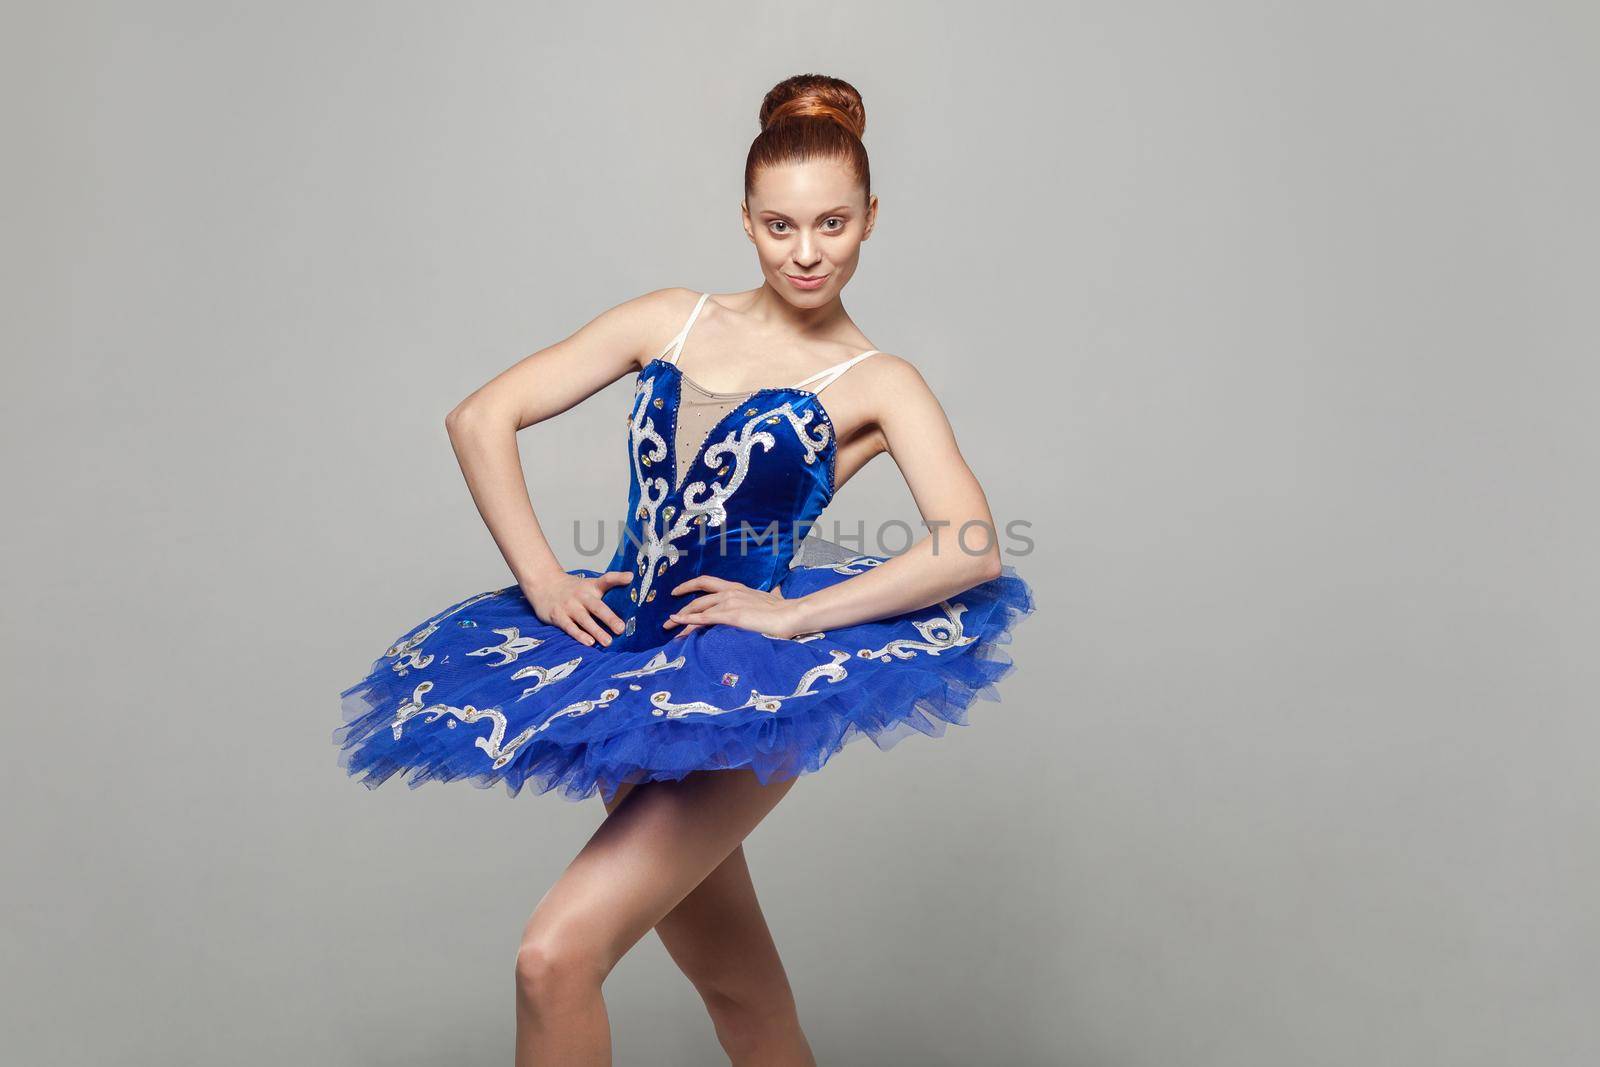 Portrait of beautiful happy ballerina woman in blue costume with makeup and bun collected hair standing against gray background, looking at camera. emotion and expression concept. indoor studio shot.